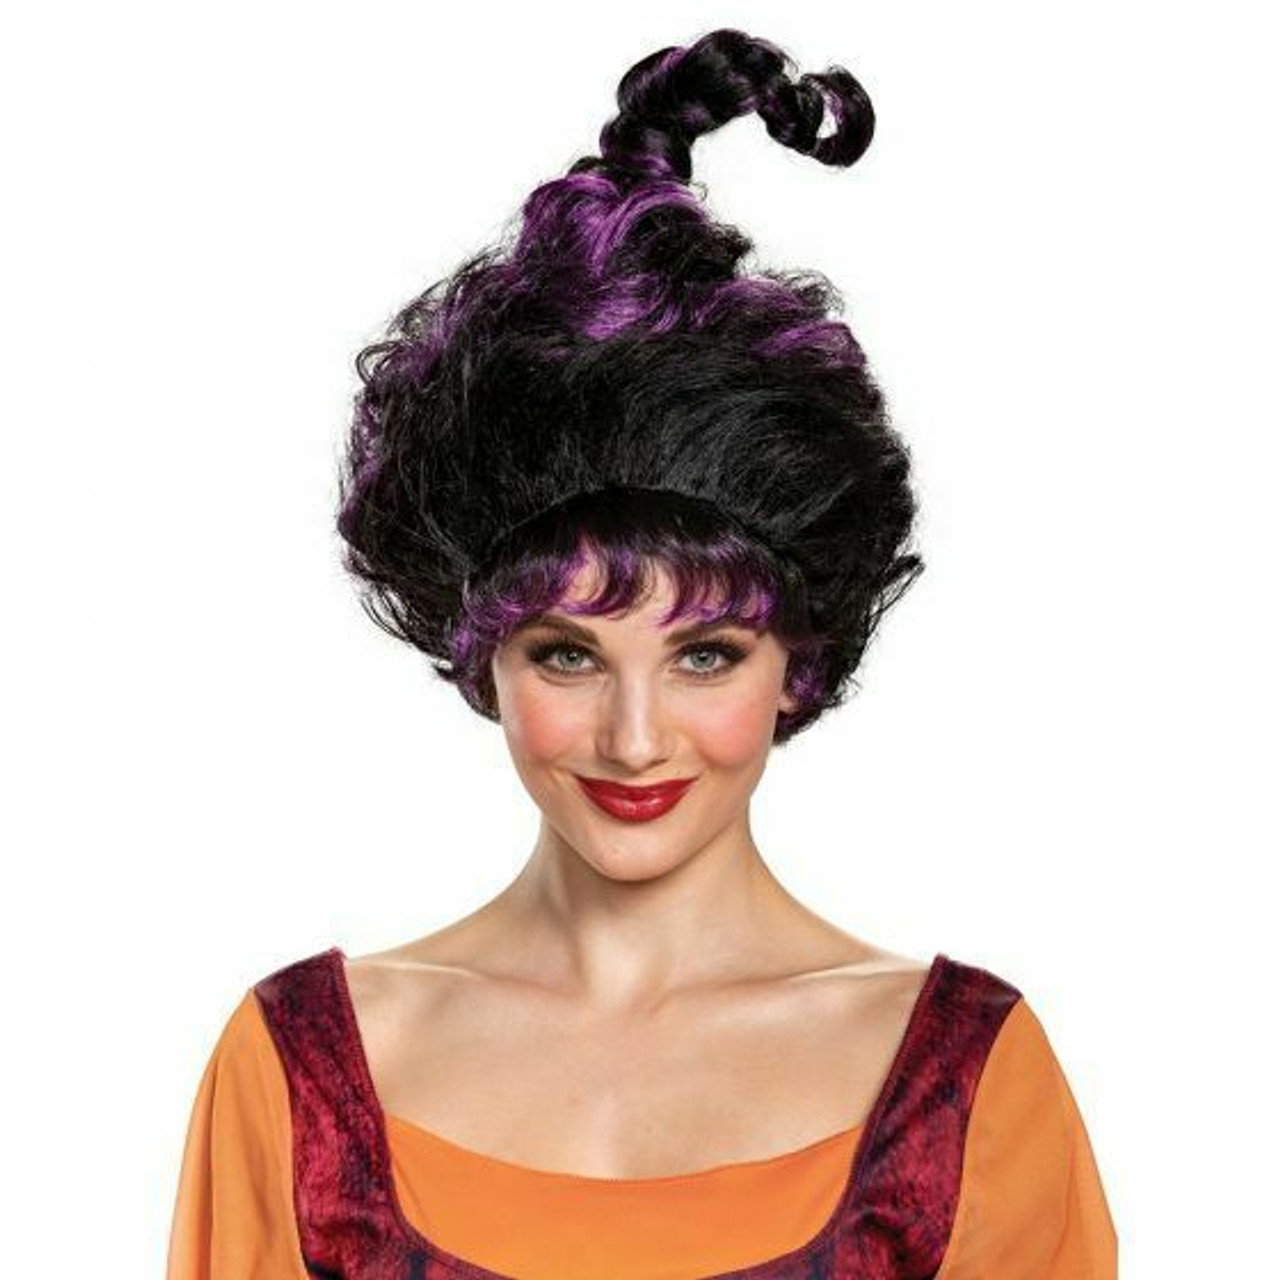 Hocus Pocus Witch The Red Queen Hair Wig Halloween Cospaly Party Fancy